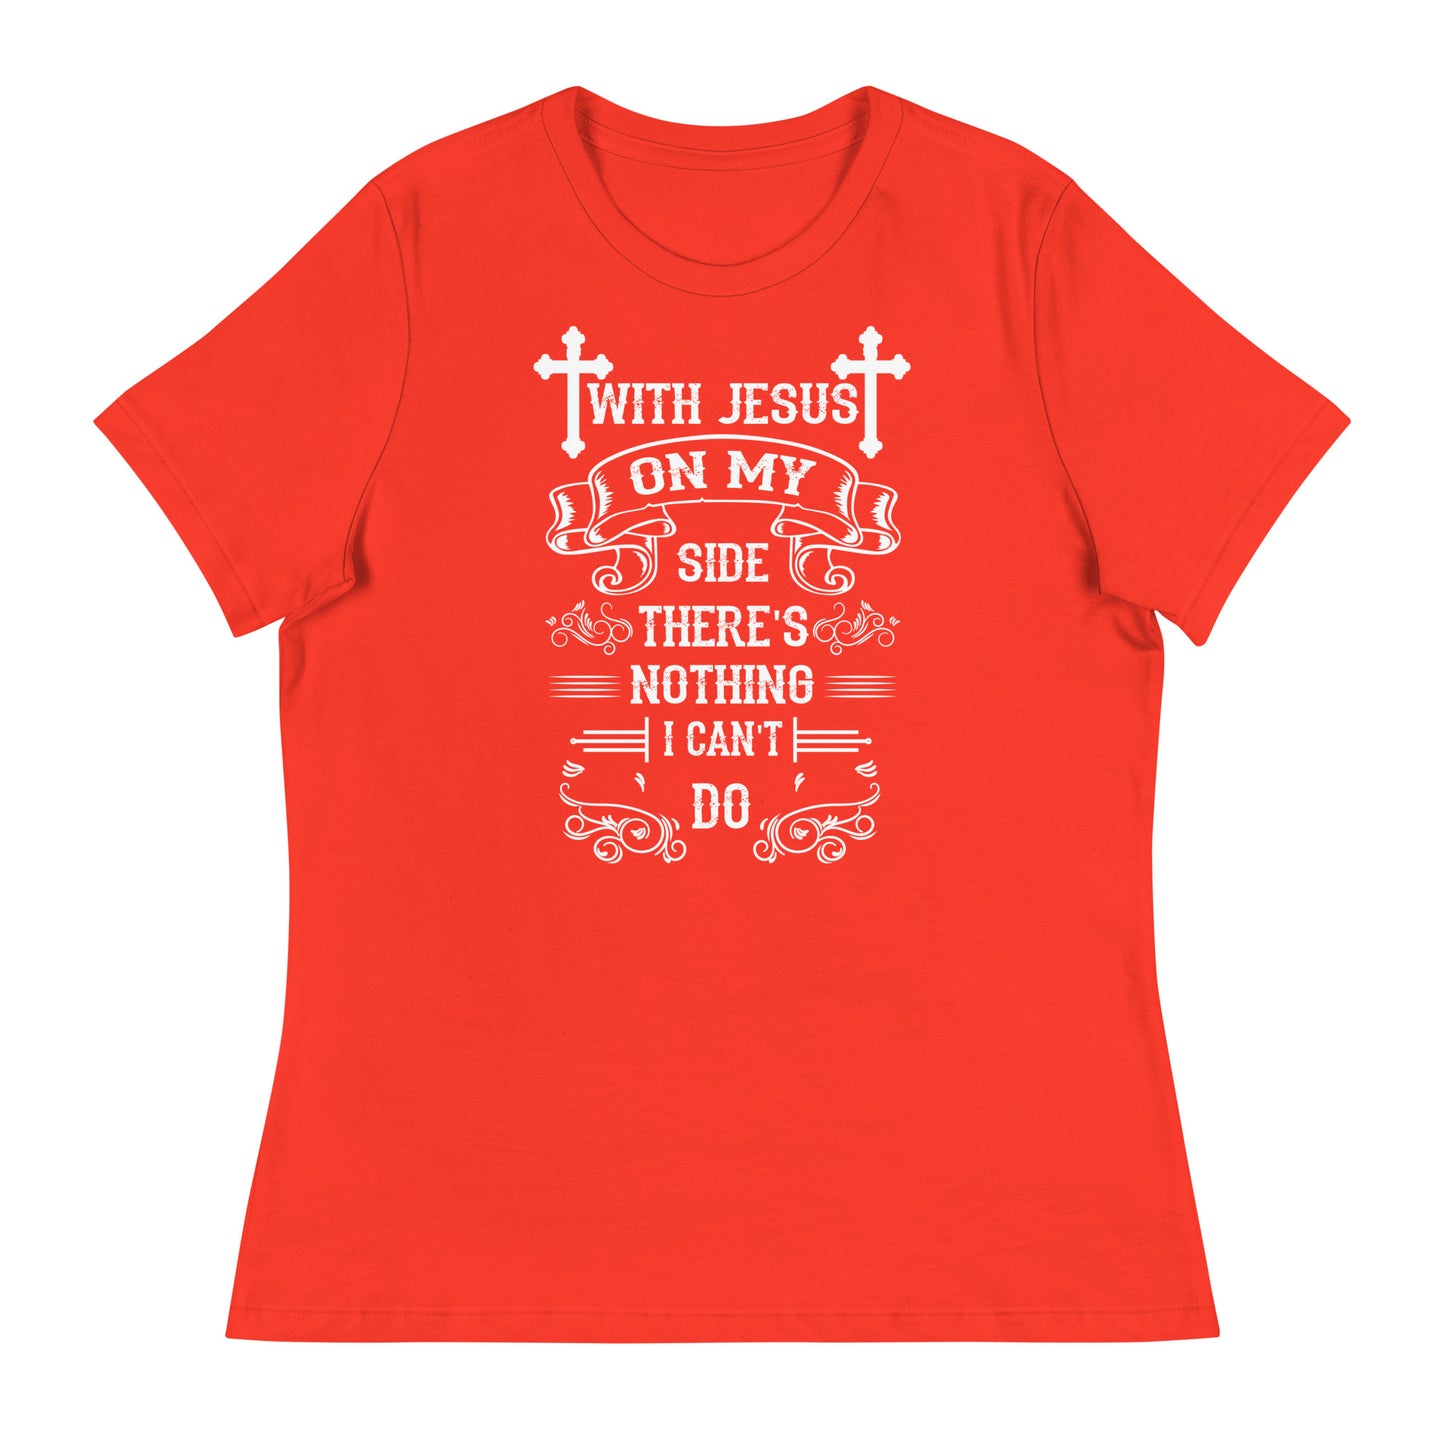 With Jesus On My Side Women's Relaxed T-Shirt